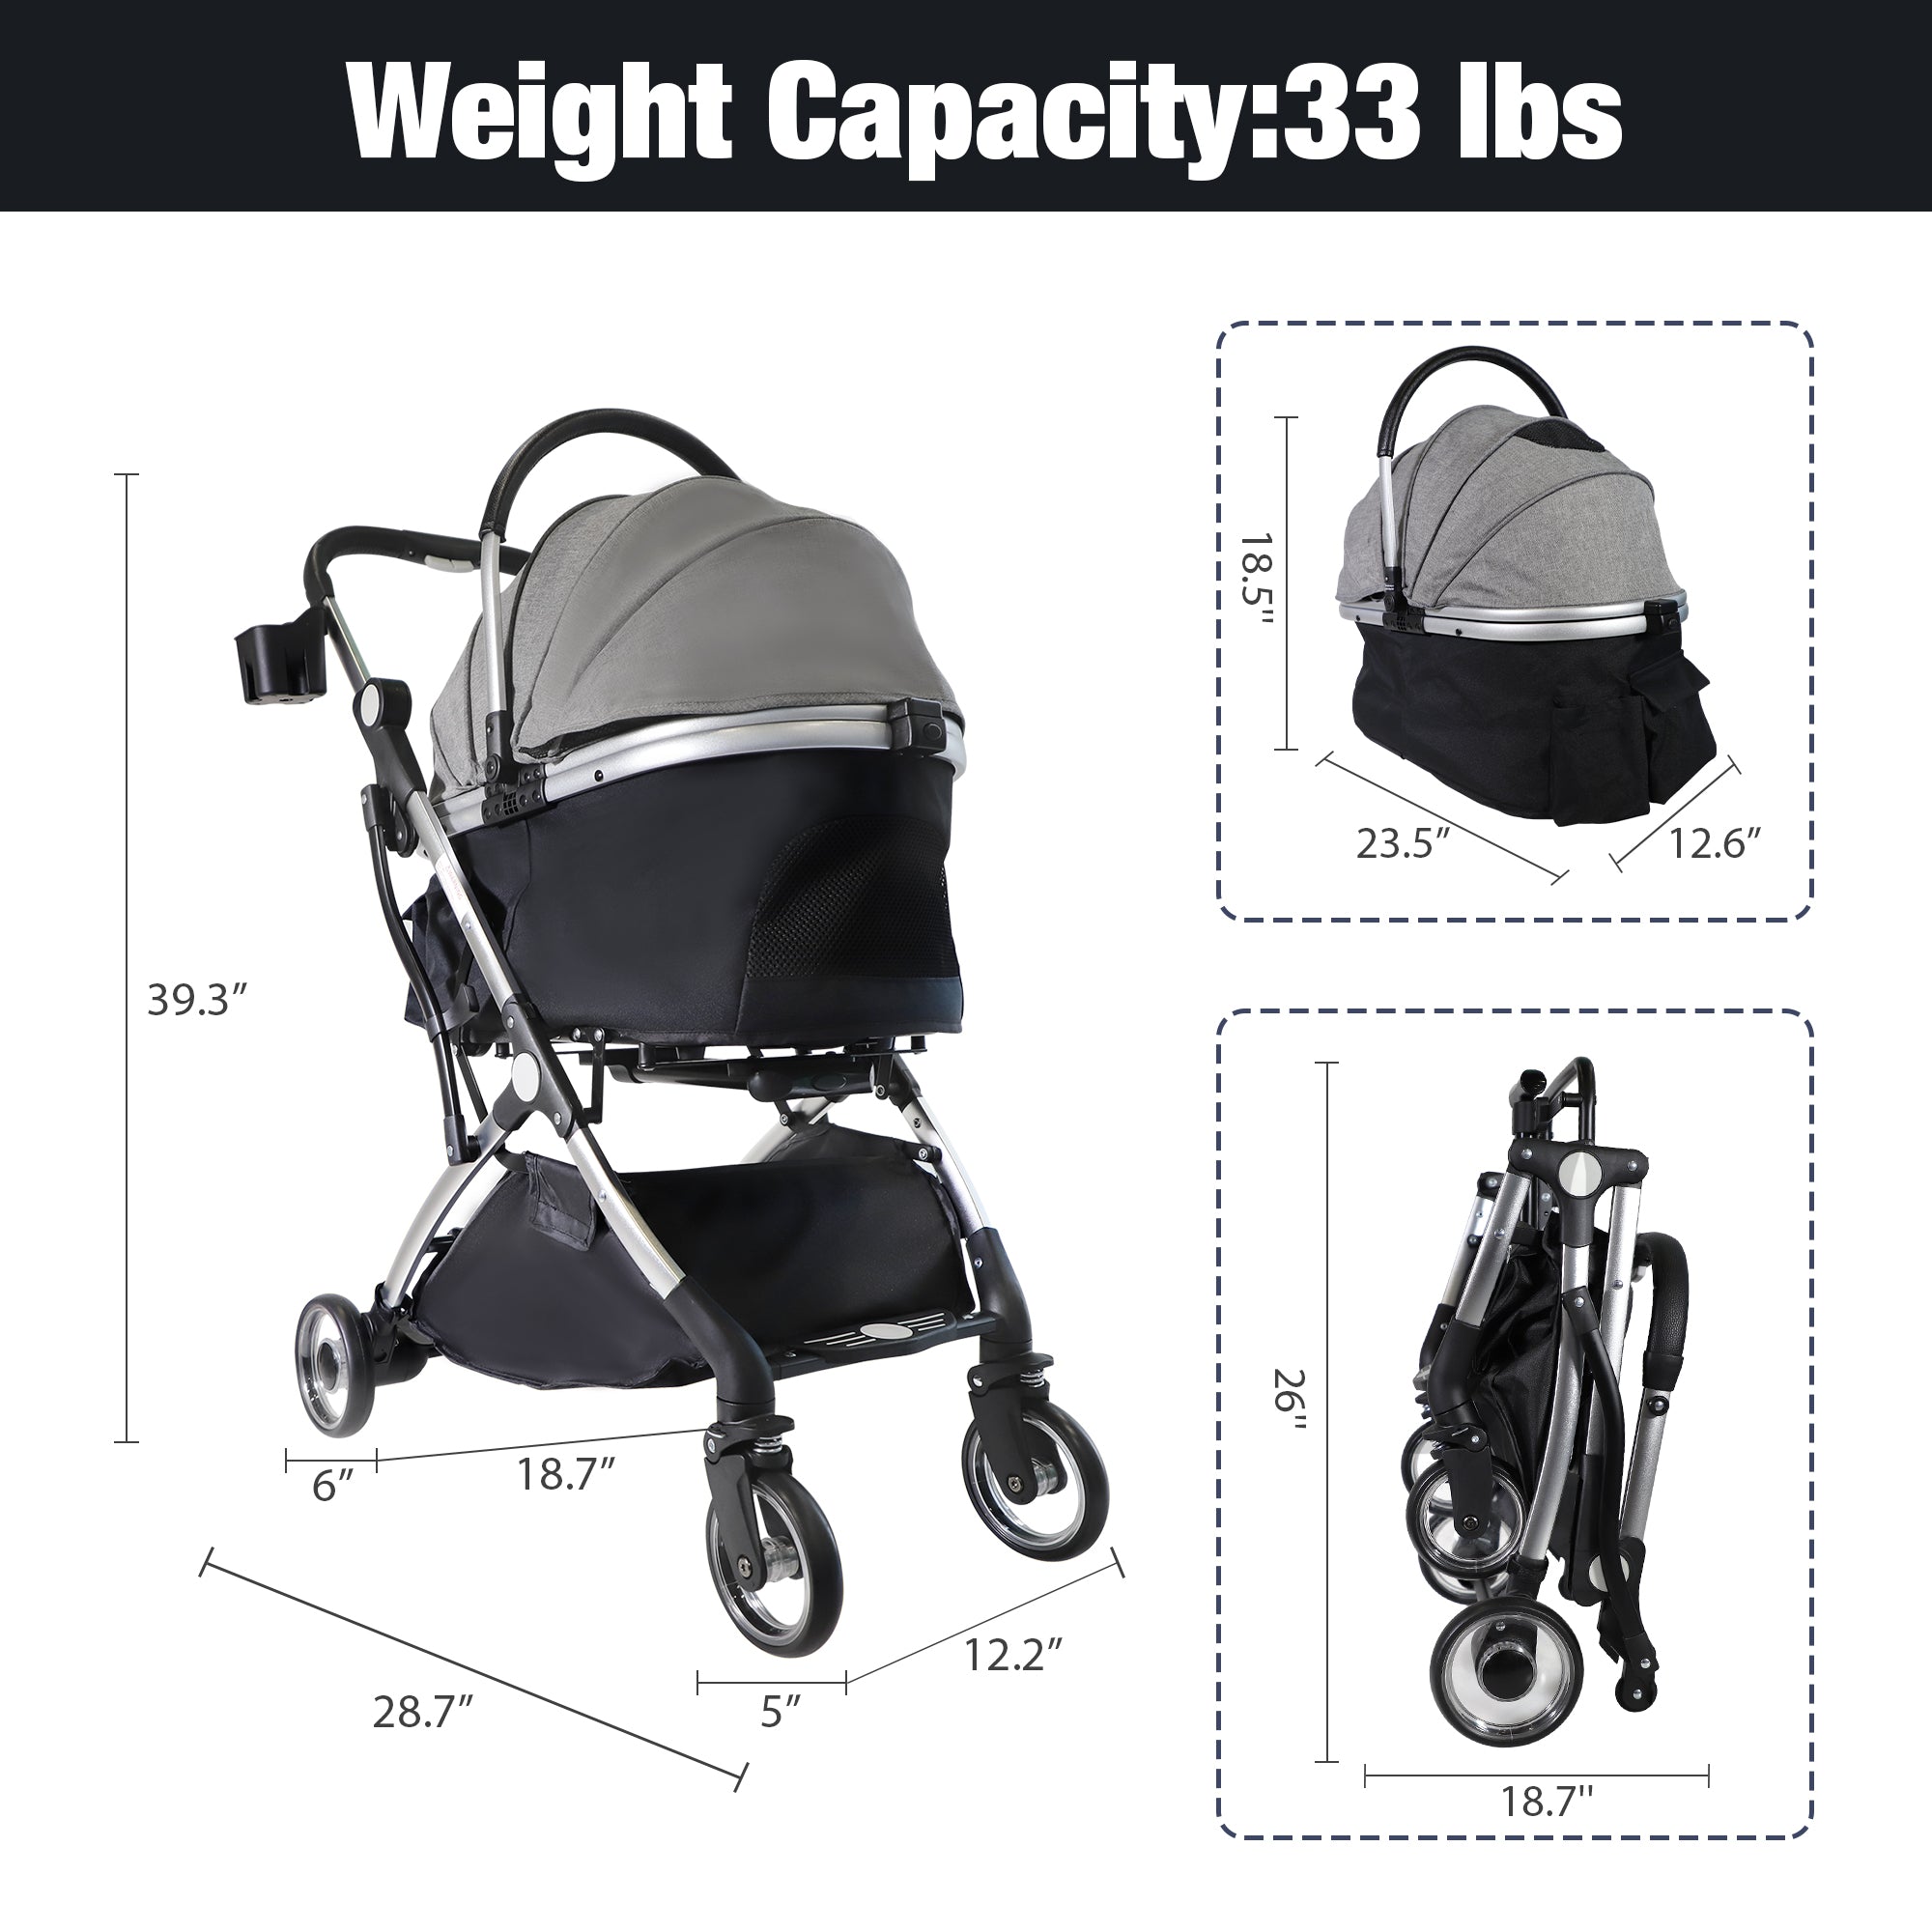 Foldable Pet Stroller 3 in 1 Design Detachable Carrier Telescopic Handle Aluminum Alloy Frame Up to 33 lbs Capacity Gray